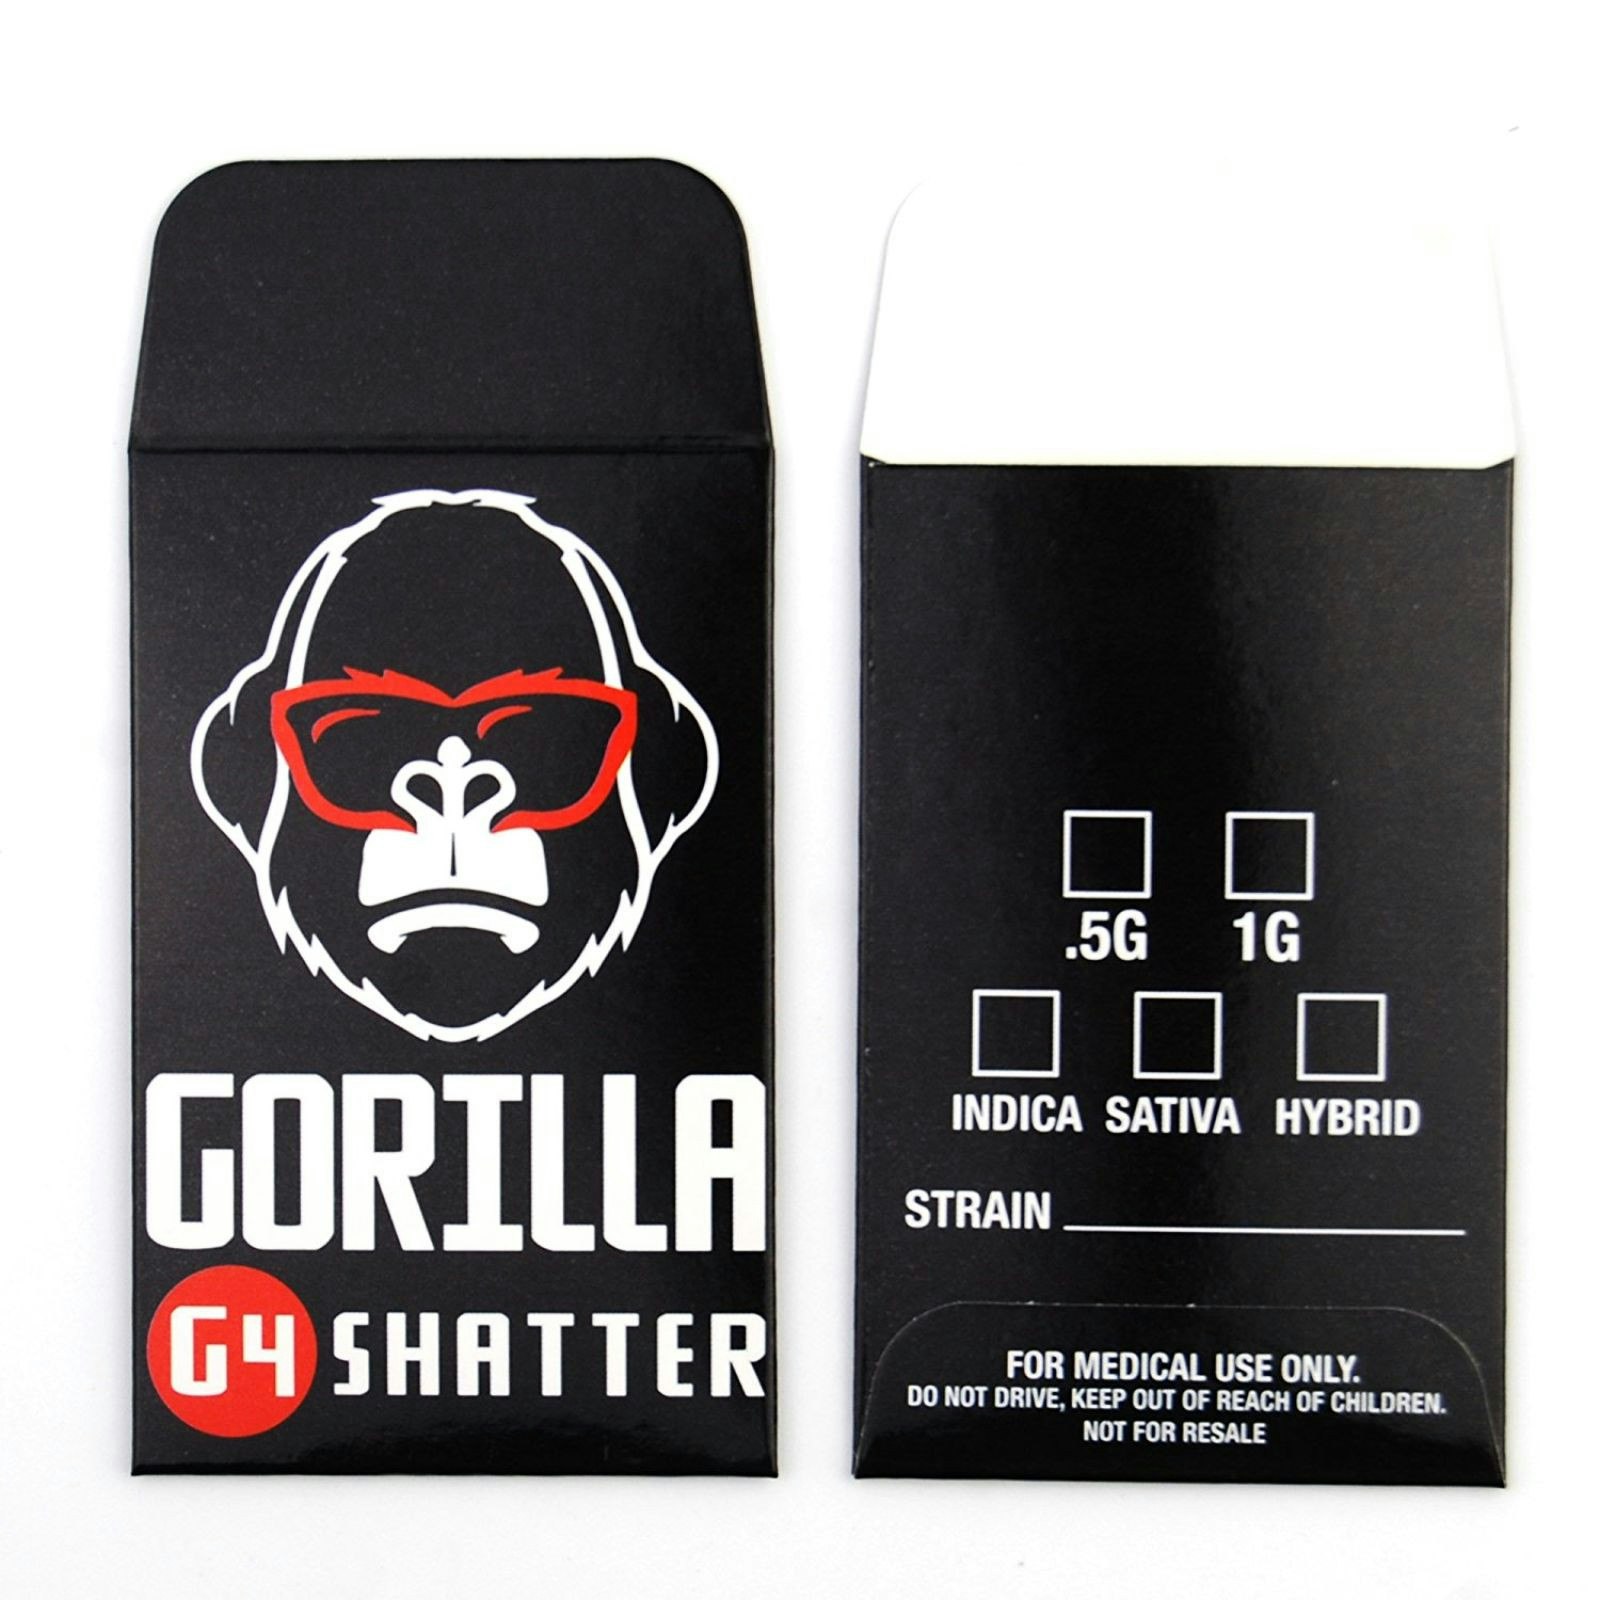 25 Premium Gorilla Extracts Strain Label Concentrate Packaging Shatter Envelopes #091